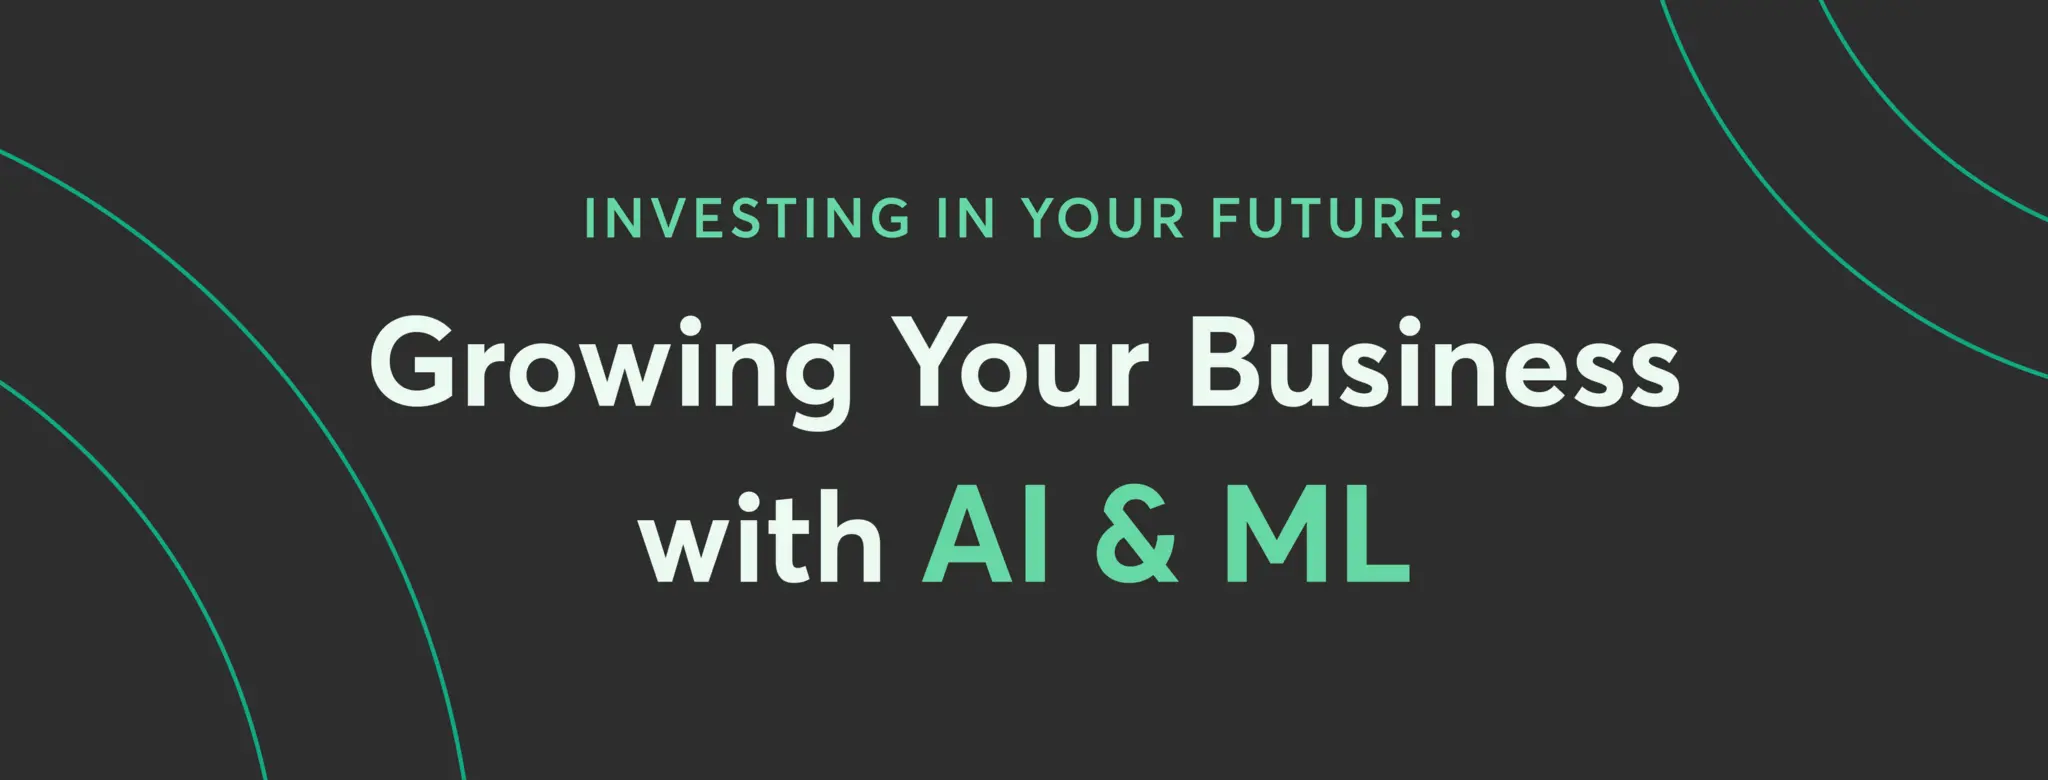 title of the blog article, growing your business with AI & ML